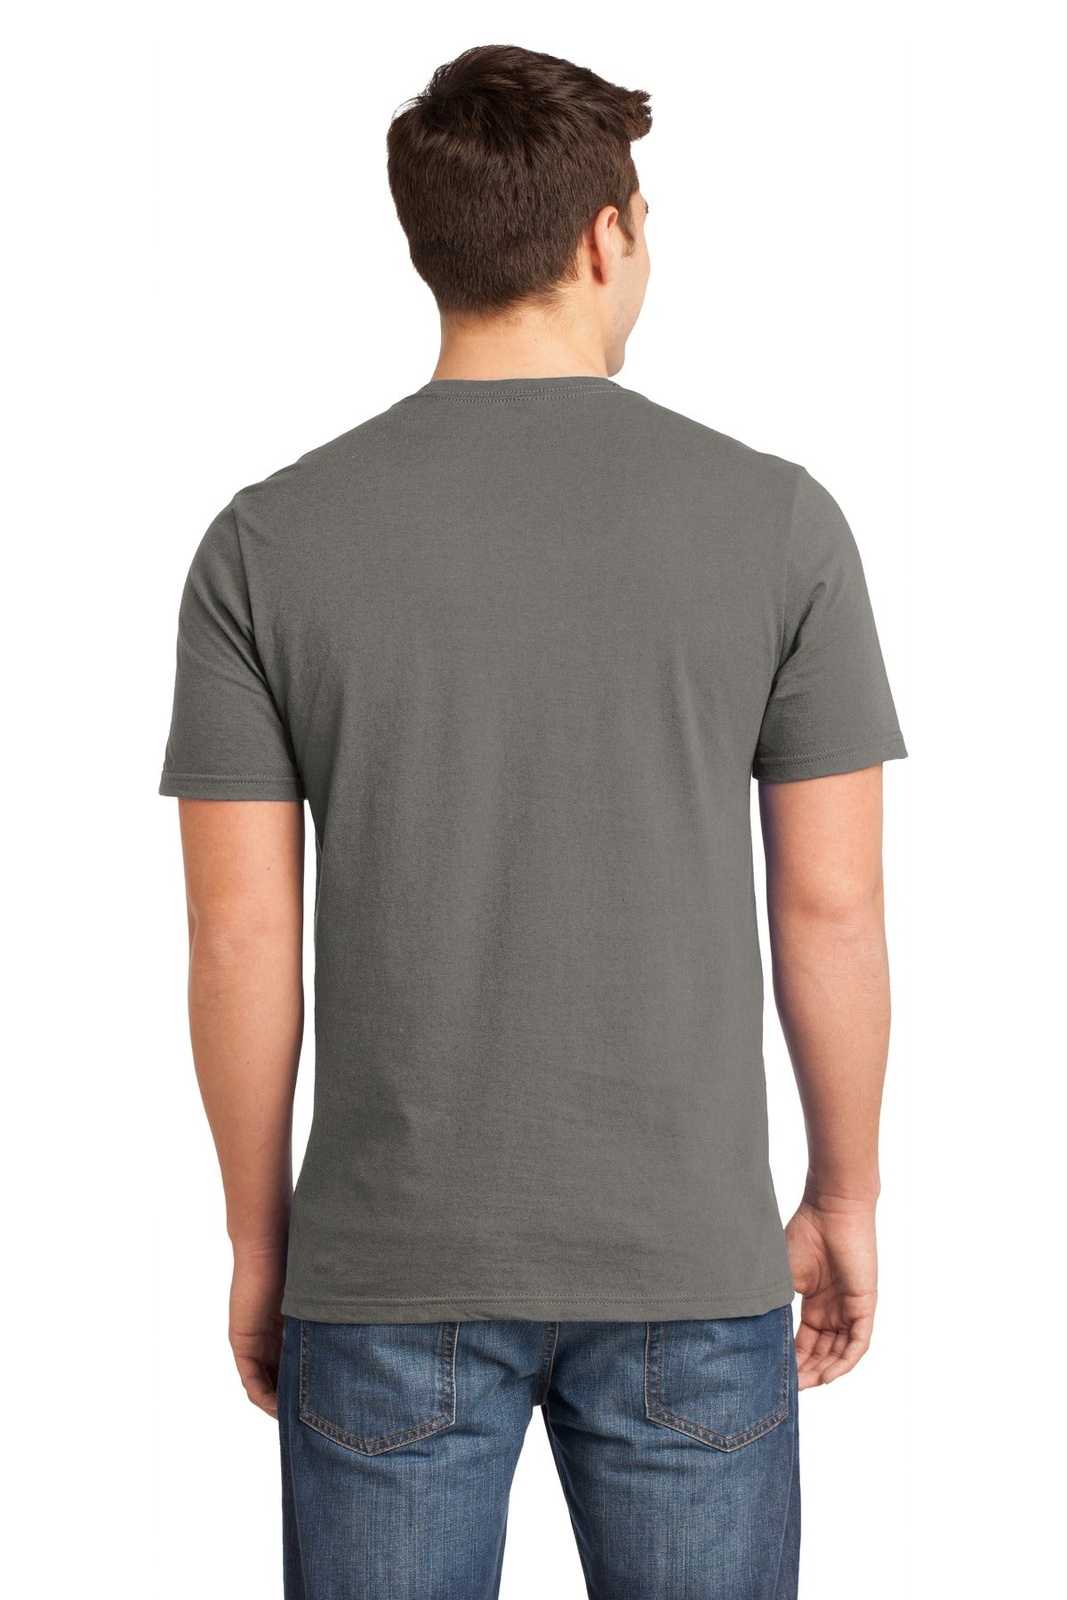 District DT6000 Very Important Tee - Gray - HIT a Double - 2